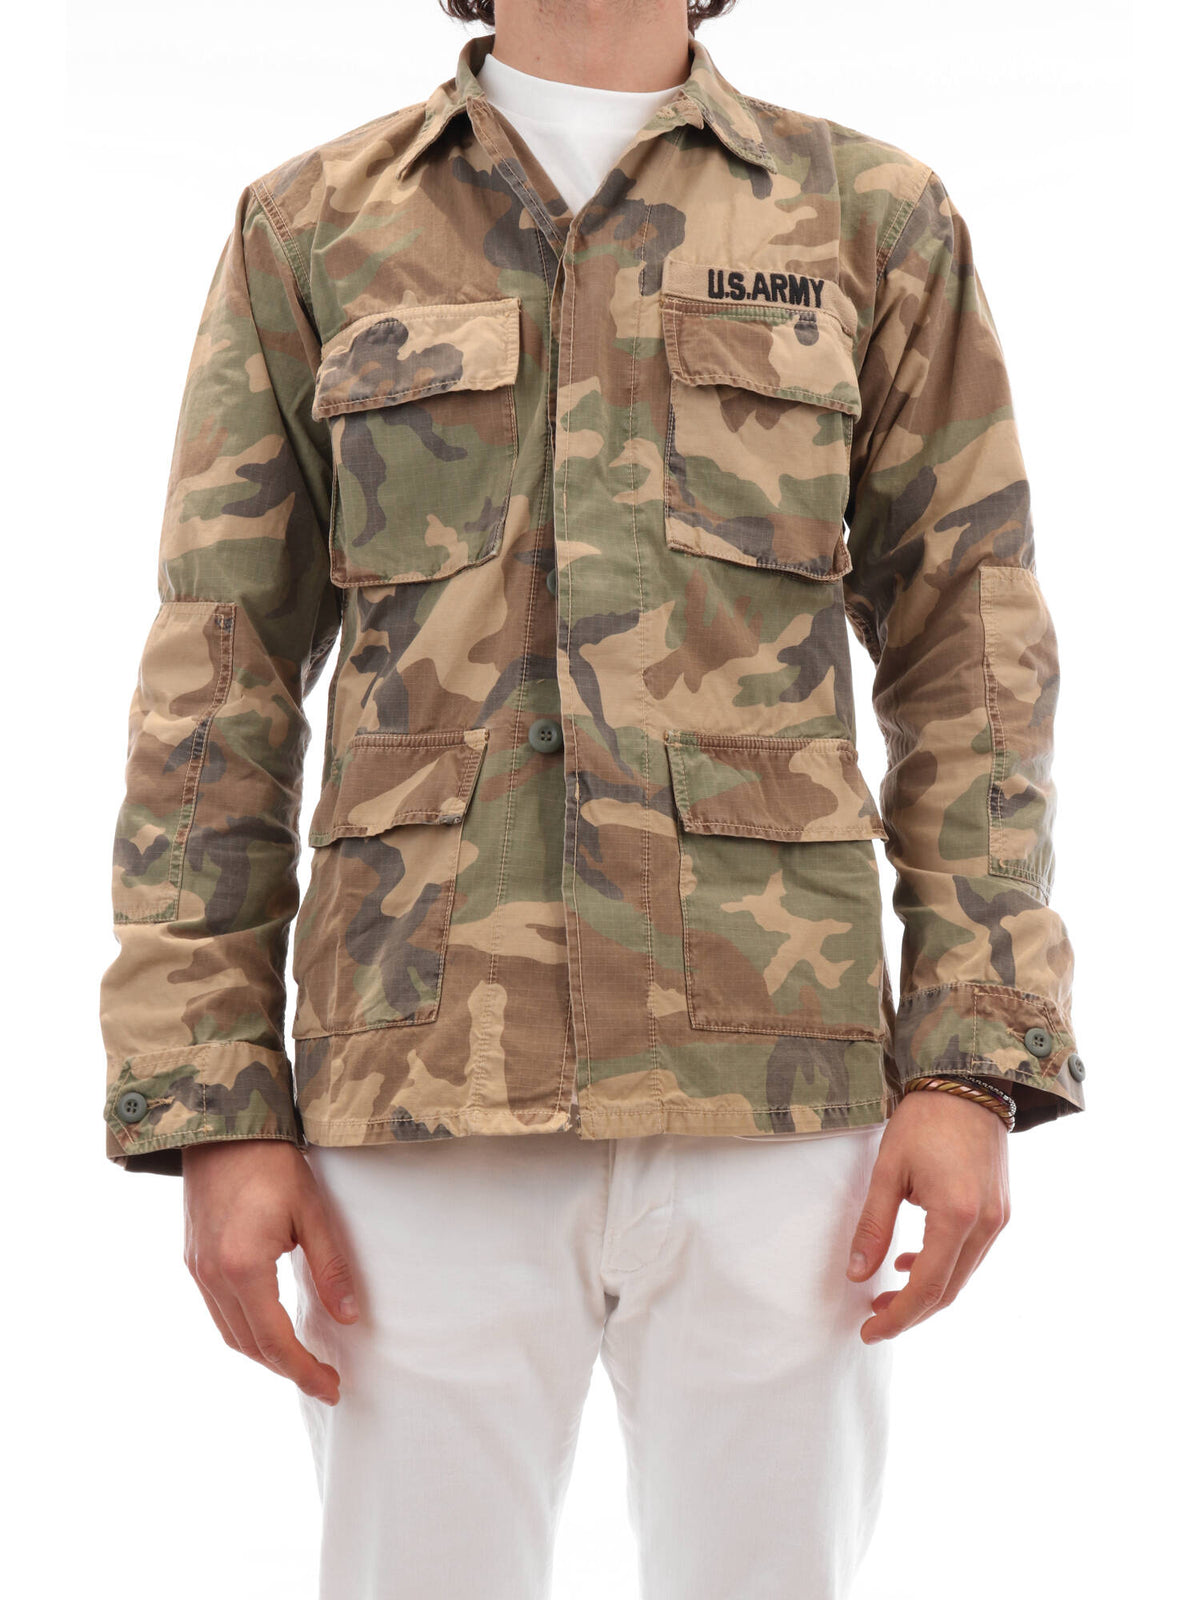 CHESAPEAKE'S GIACCA KORPELA MILITARY ARMY IN COTONE COLORE CAMOUFLAGE